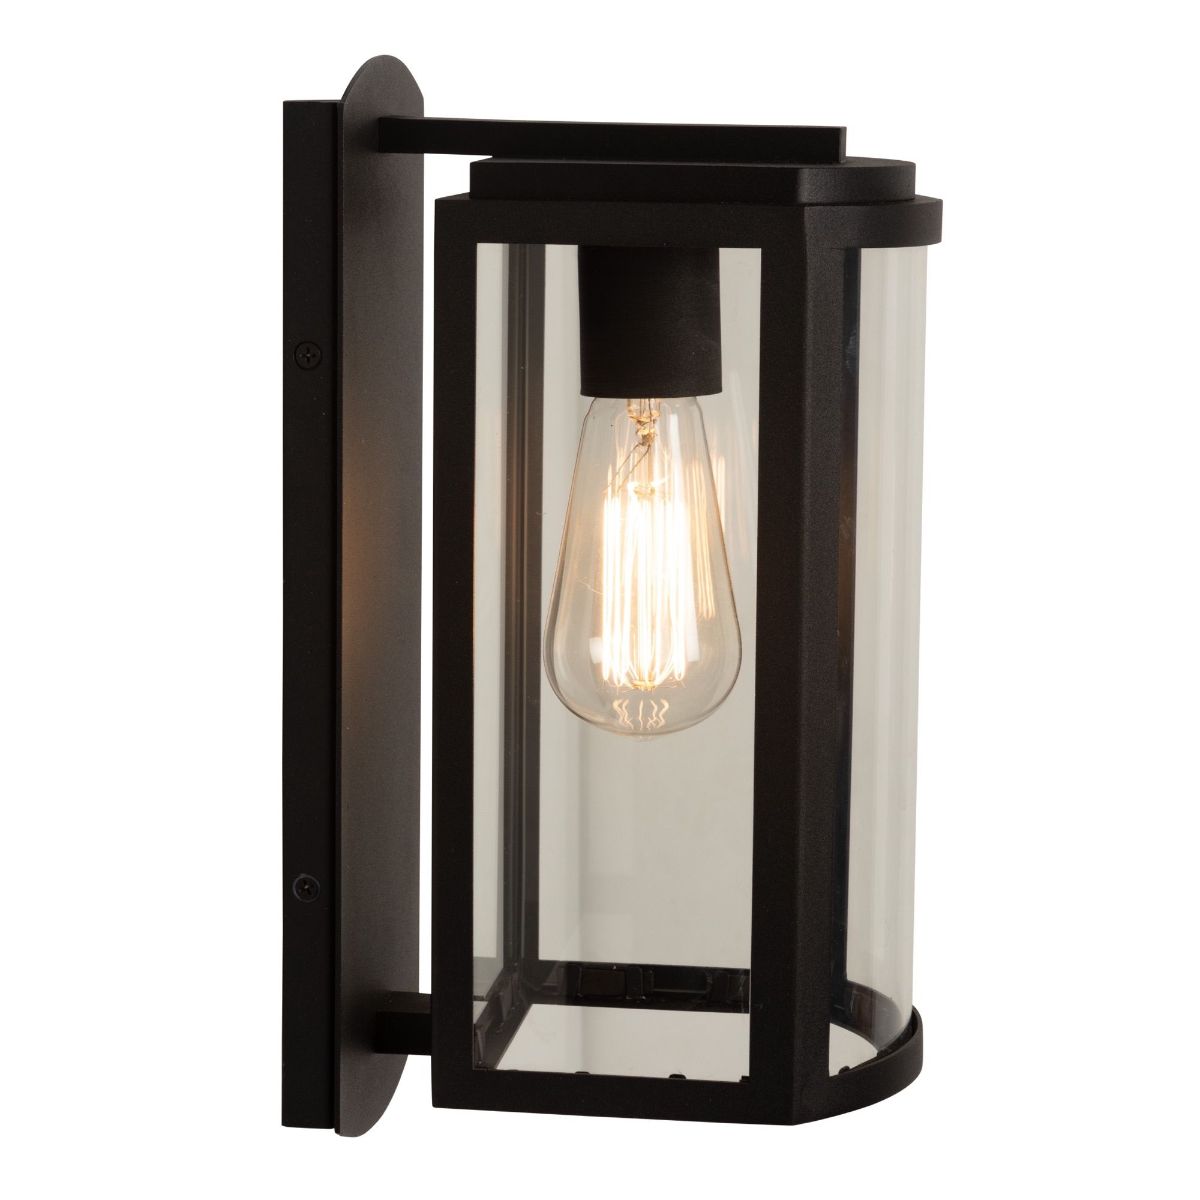 Lakewood 13 In. Outdoor Wall Light Matte Black Finish